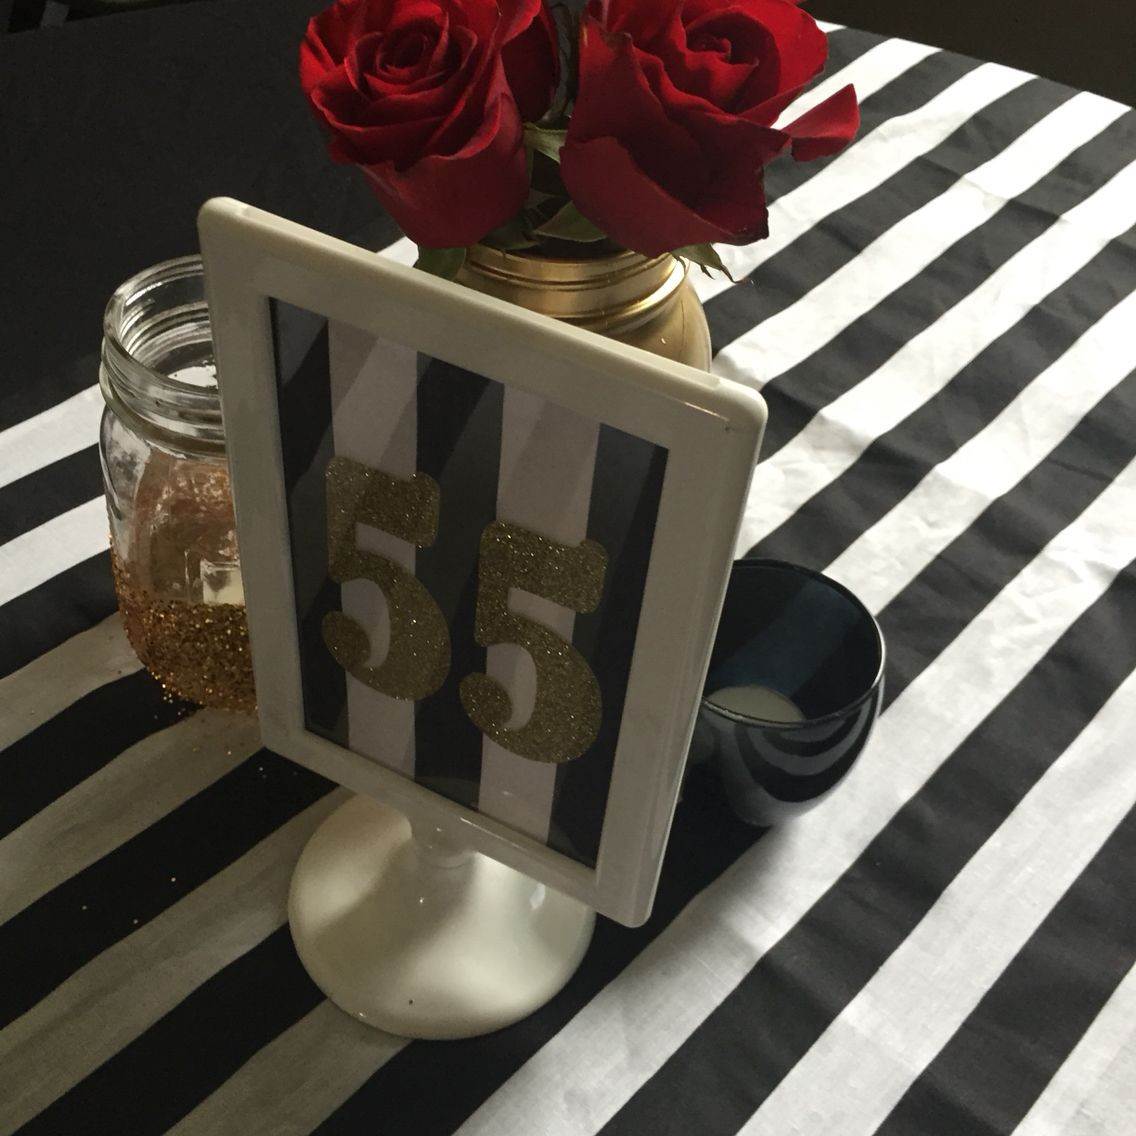 55Th Birthday Party Ideas
 Centerpieces for a 55th birthday party